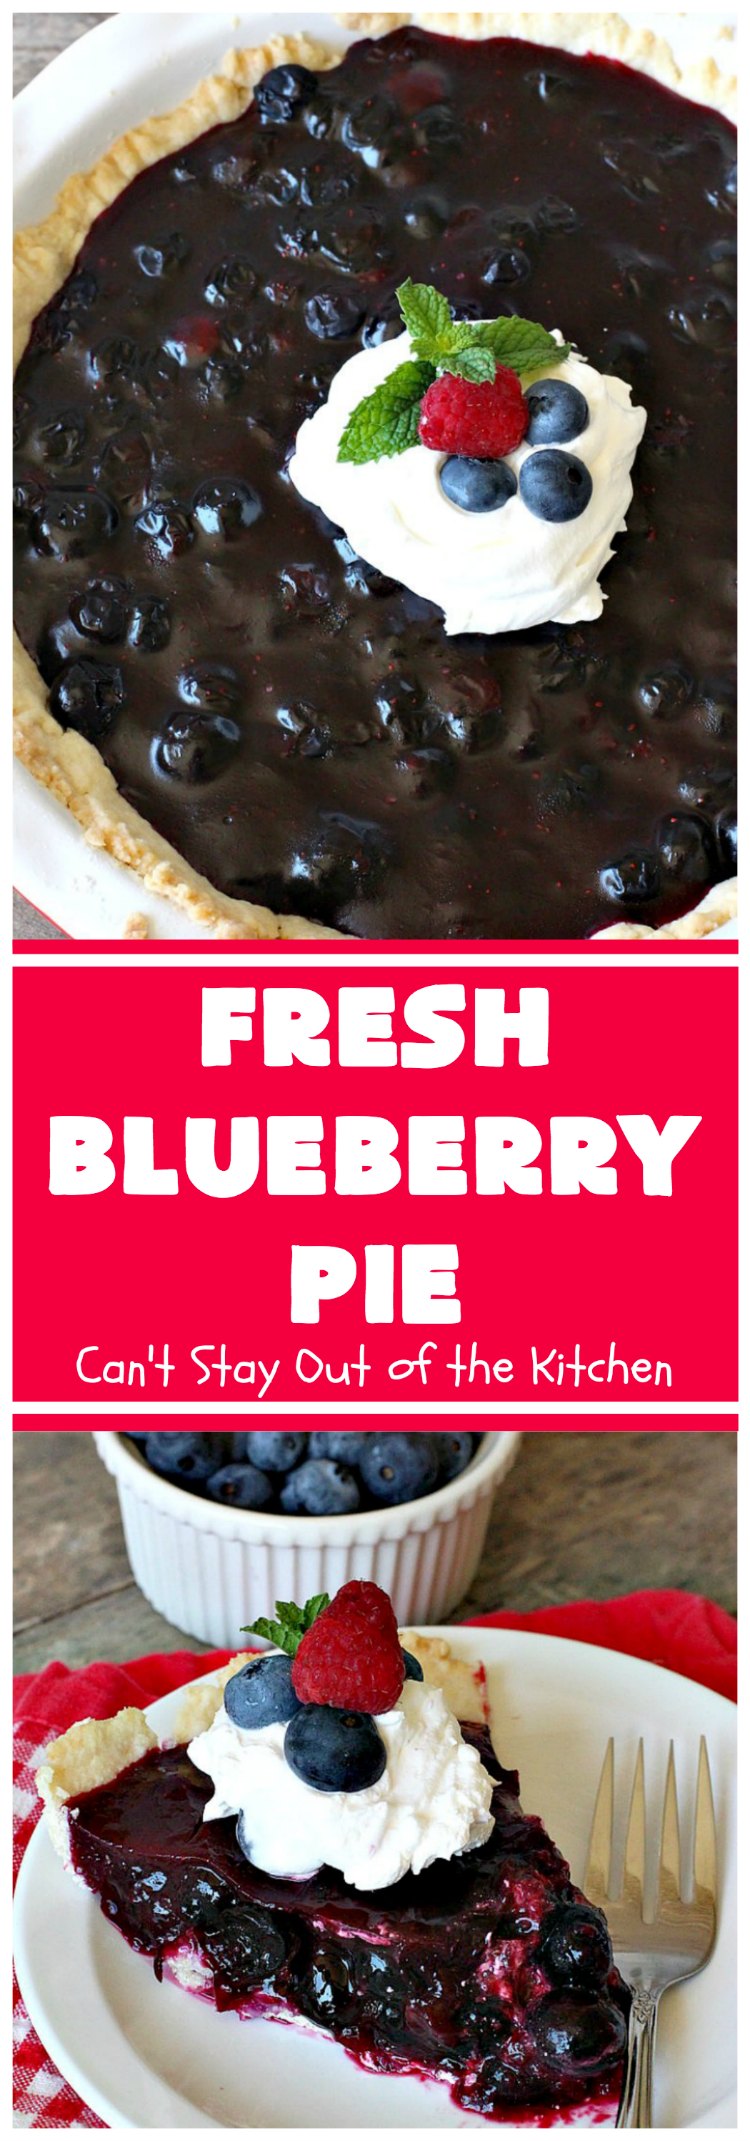 Fresh Blueberry Pie | Can't Stay Out of the Kitchen